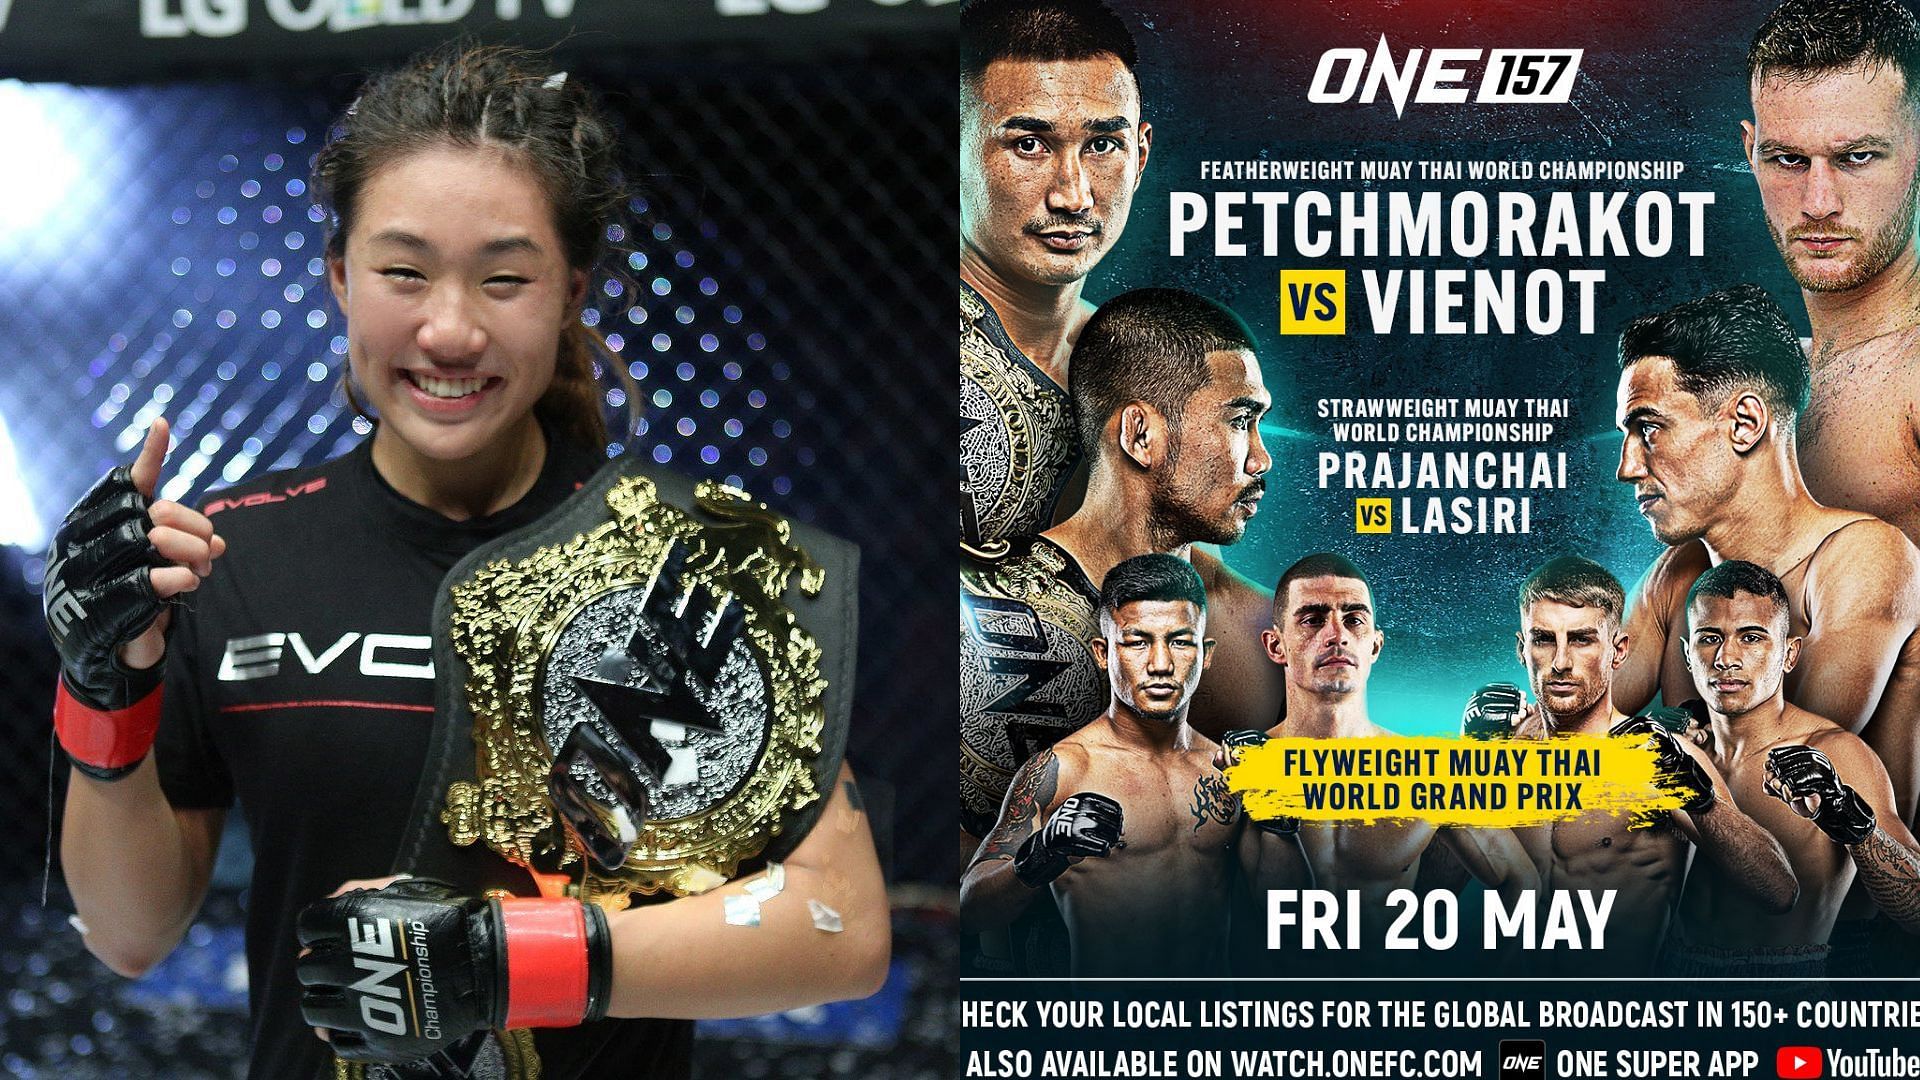 Angela Lee (left), ONE 157 poster (right) [Photo Credits: ONE Championship]